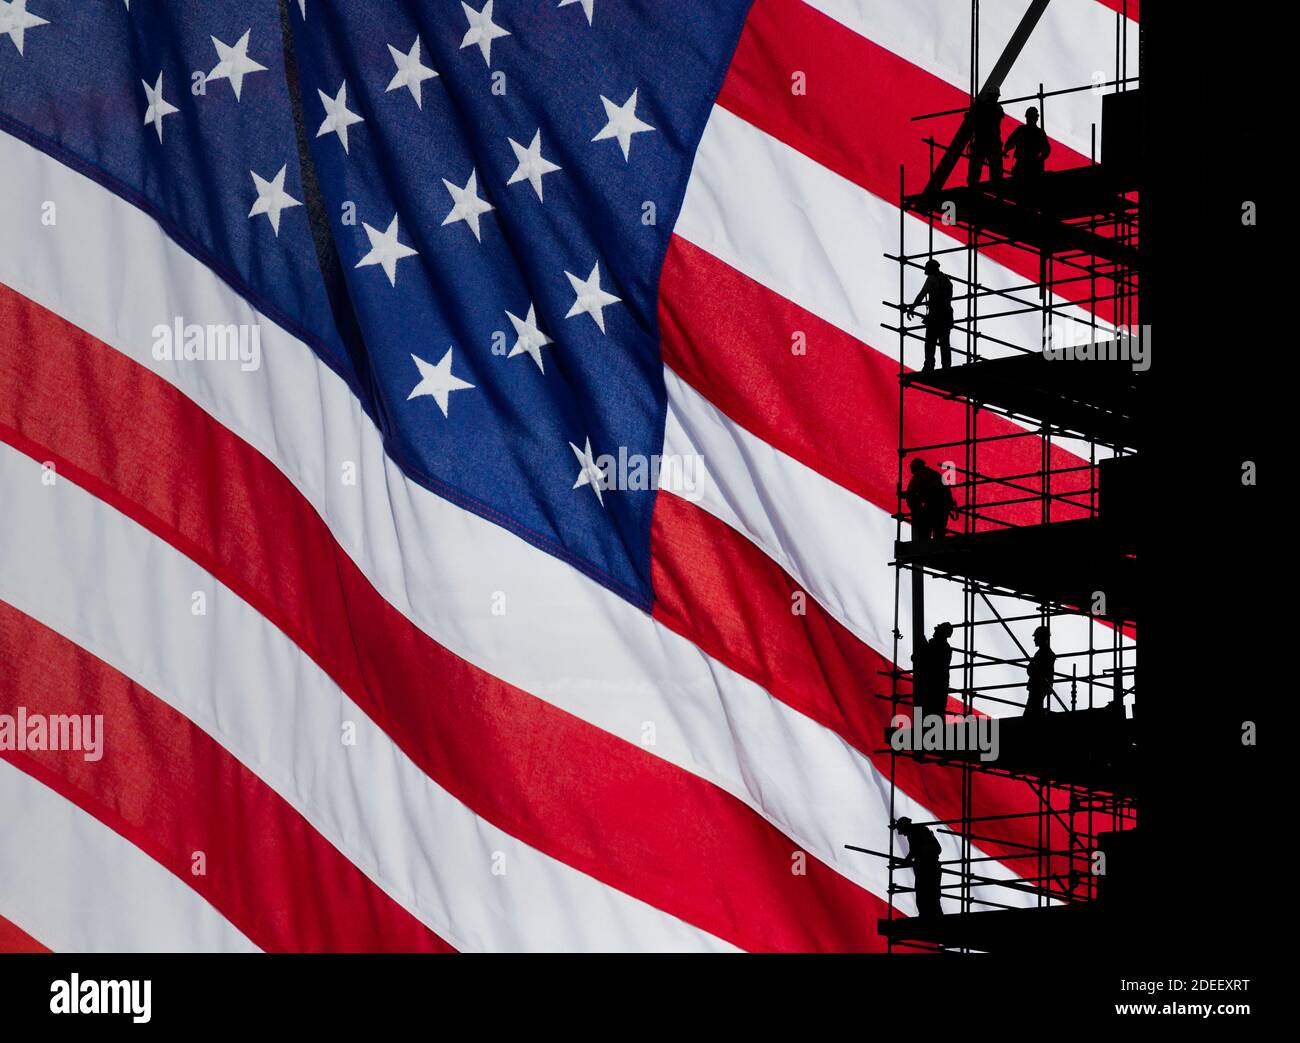 Construction workers on scaffolding with Stars and Stripes flag as backdrop. Concept image: USA, American economy, blue collar worker... Stock Photo